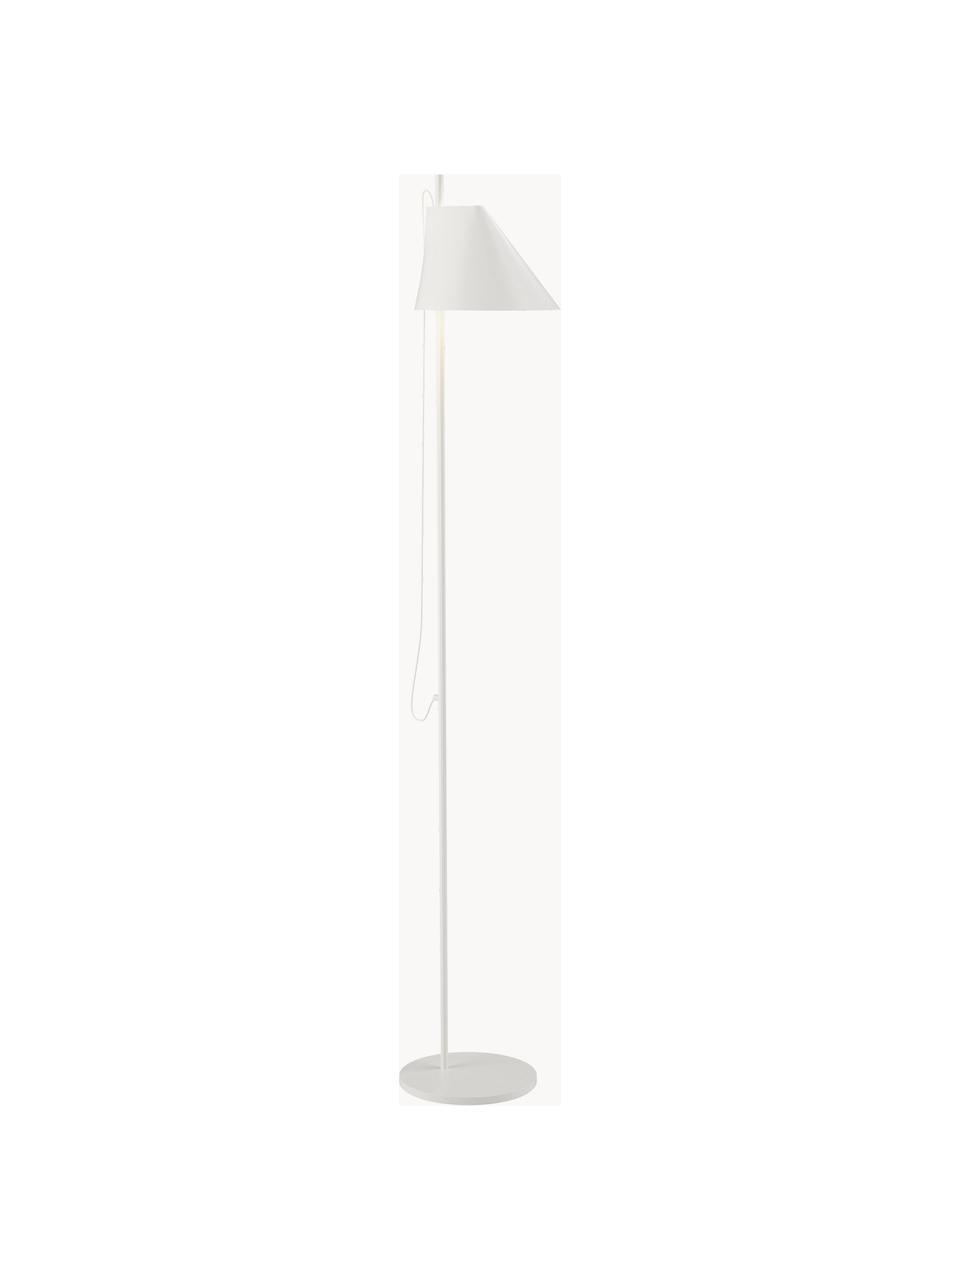 Dimmbare LED-Stehlampe Yuh mit Timerfunktion, Weiss, H 140 cm